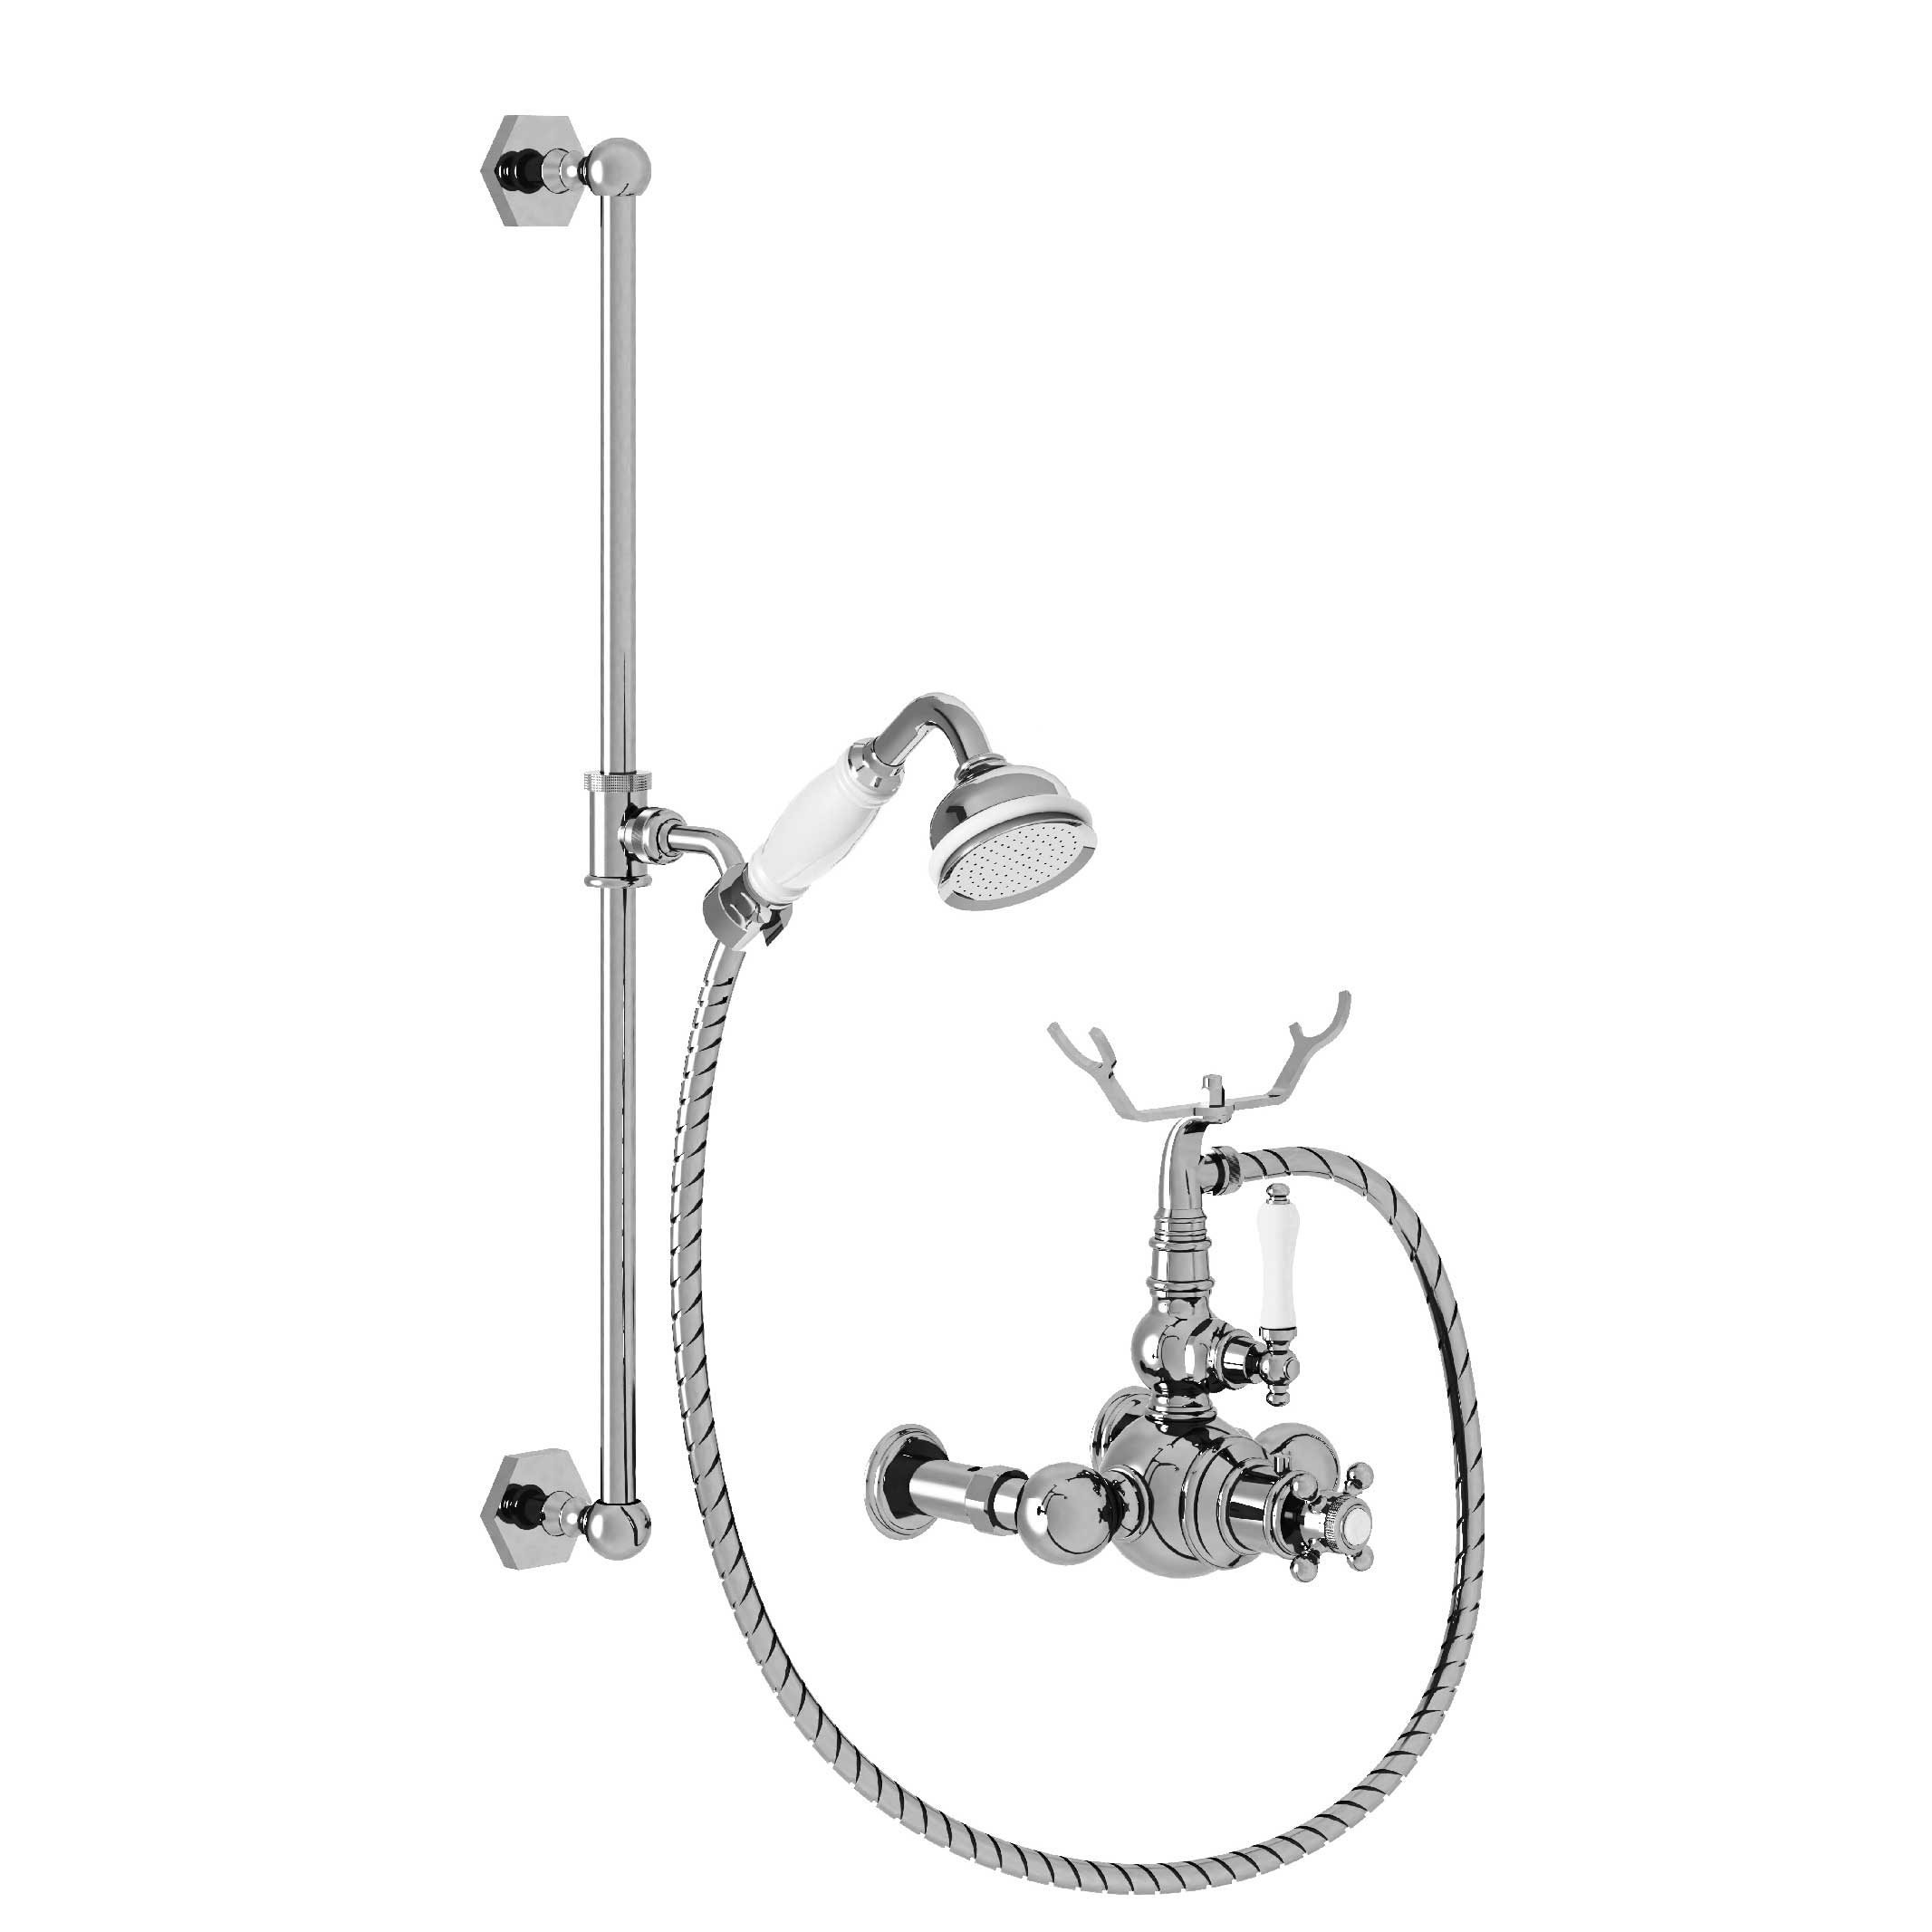 M32-2202T Mitigeur thermo. douche, coulidouche